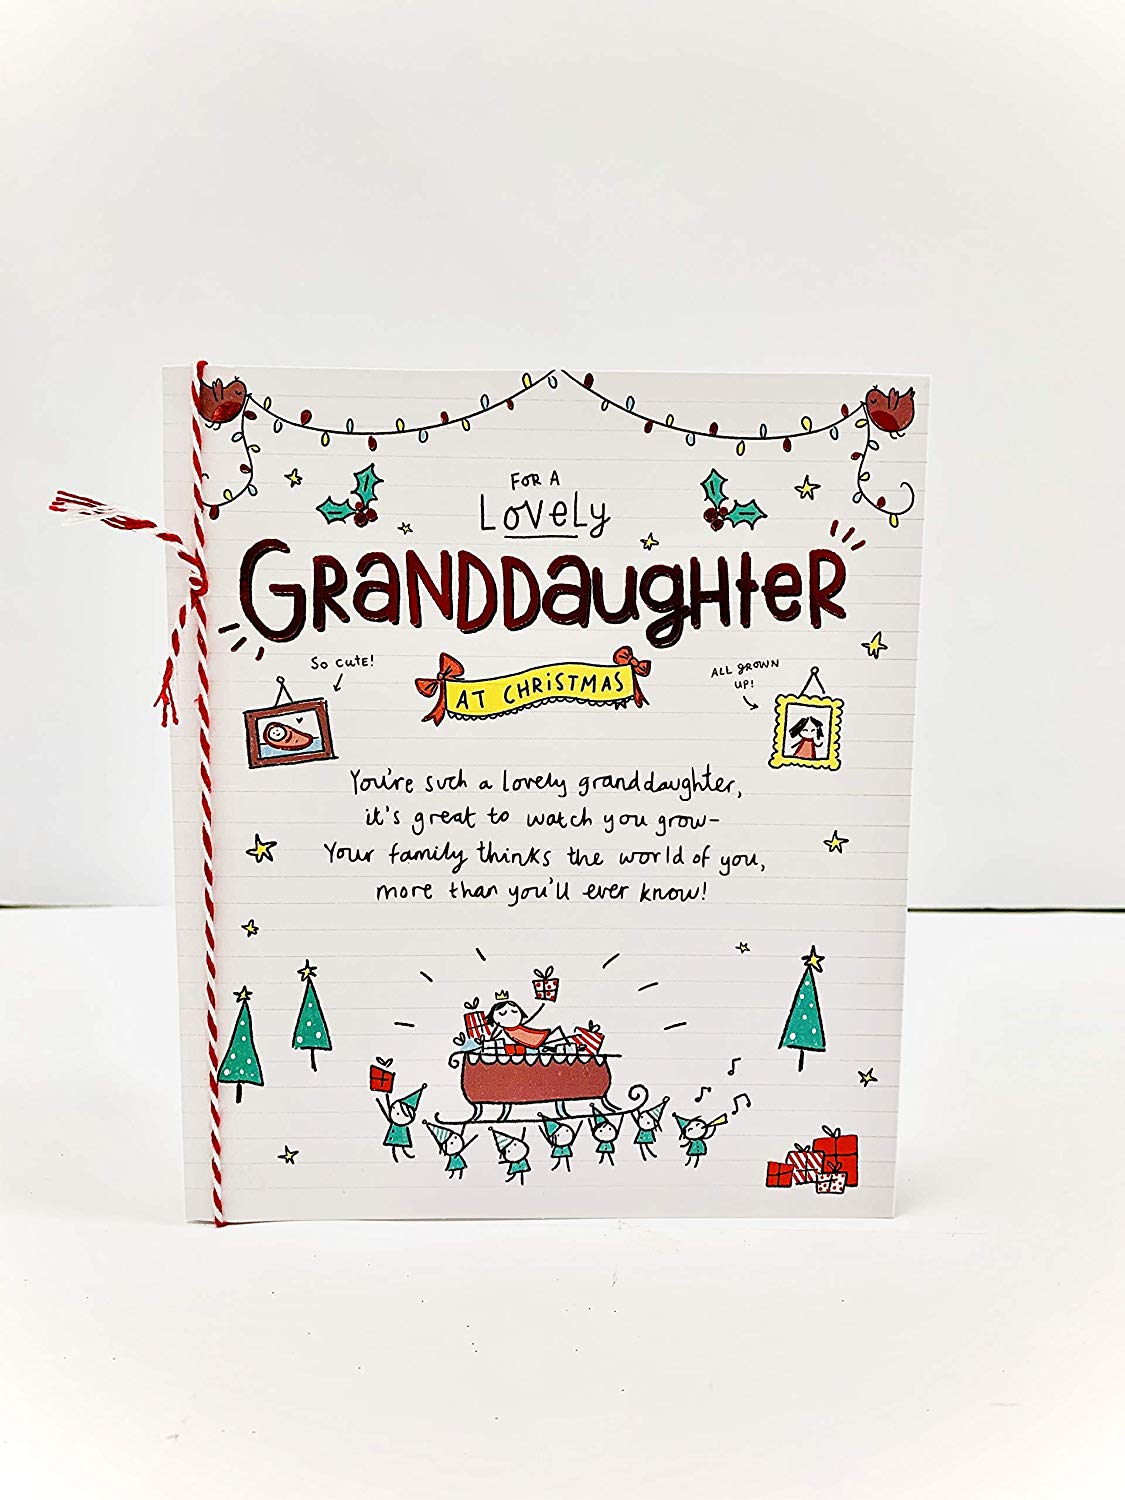 Granddaughter Christmas Card with Lovely Words